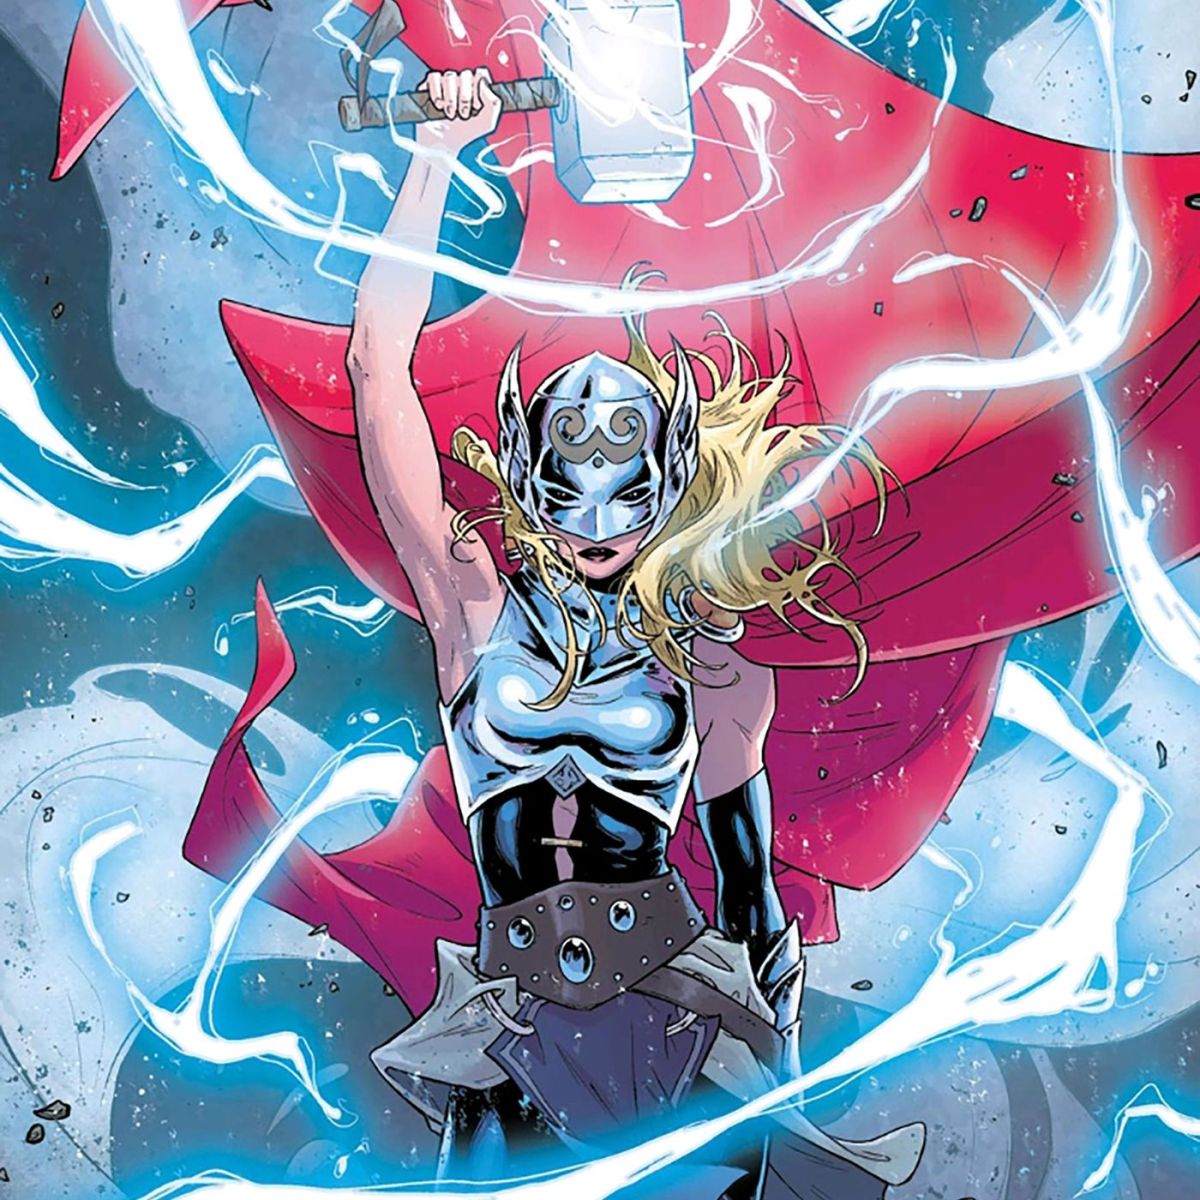 Jane Foster as The Mighty Thor in the comics